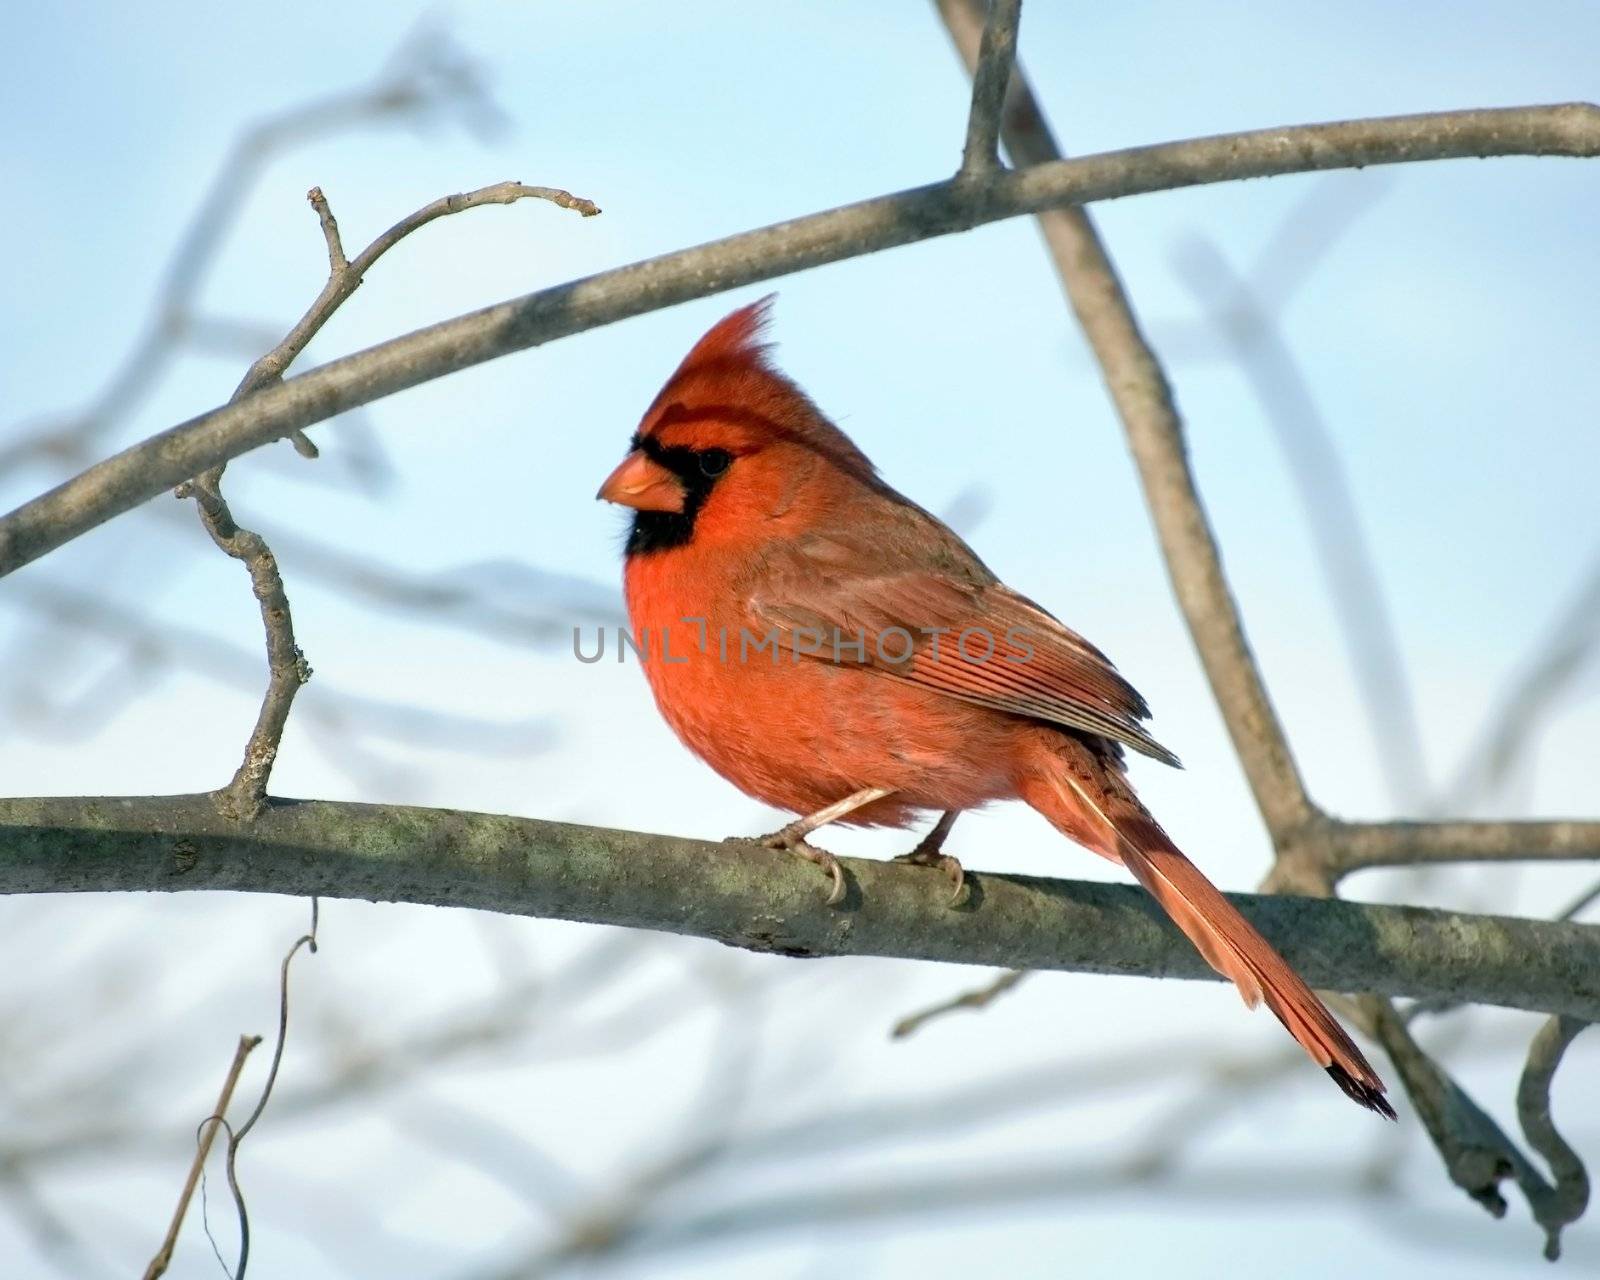 A Northern Cardinal perched on a tree branch.